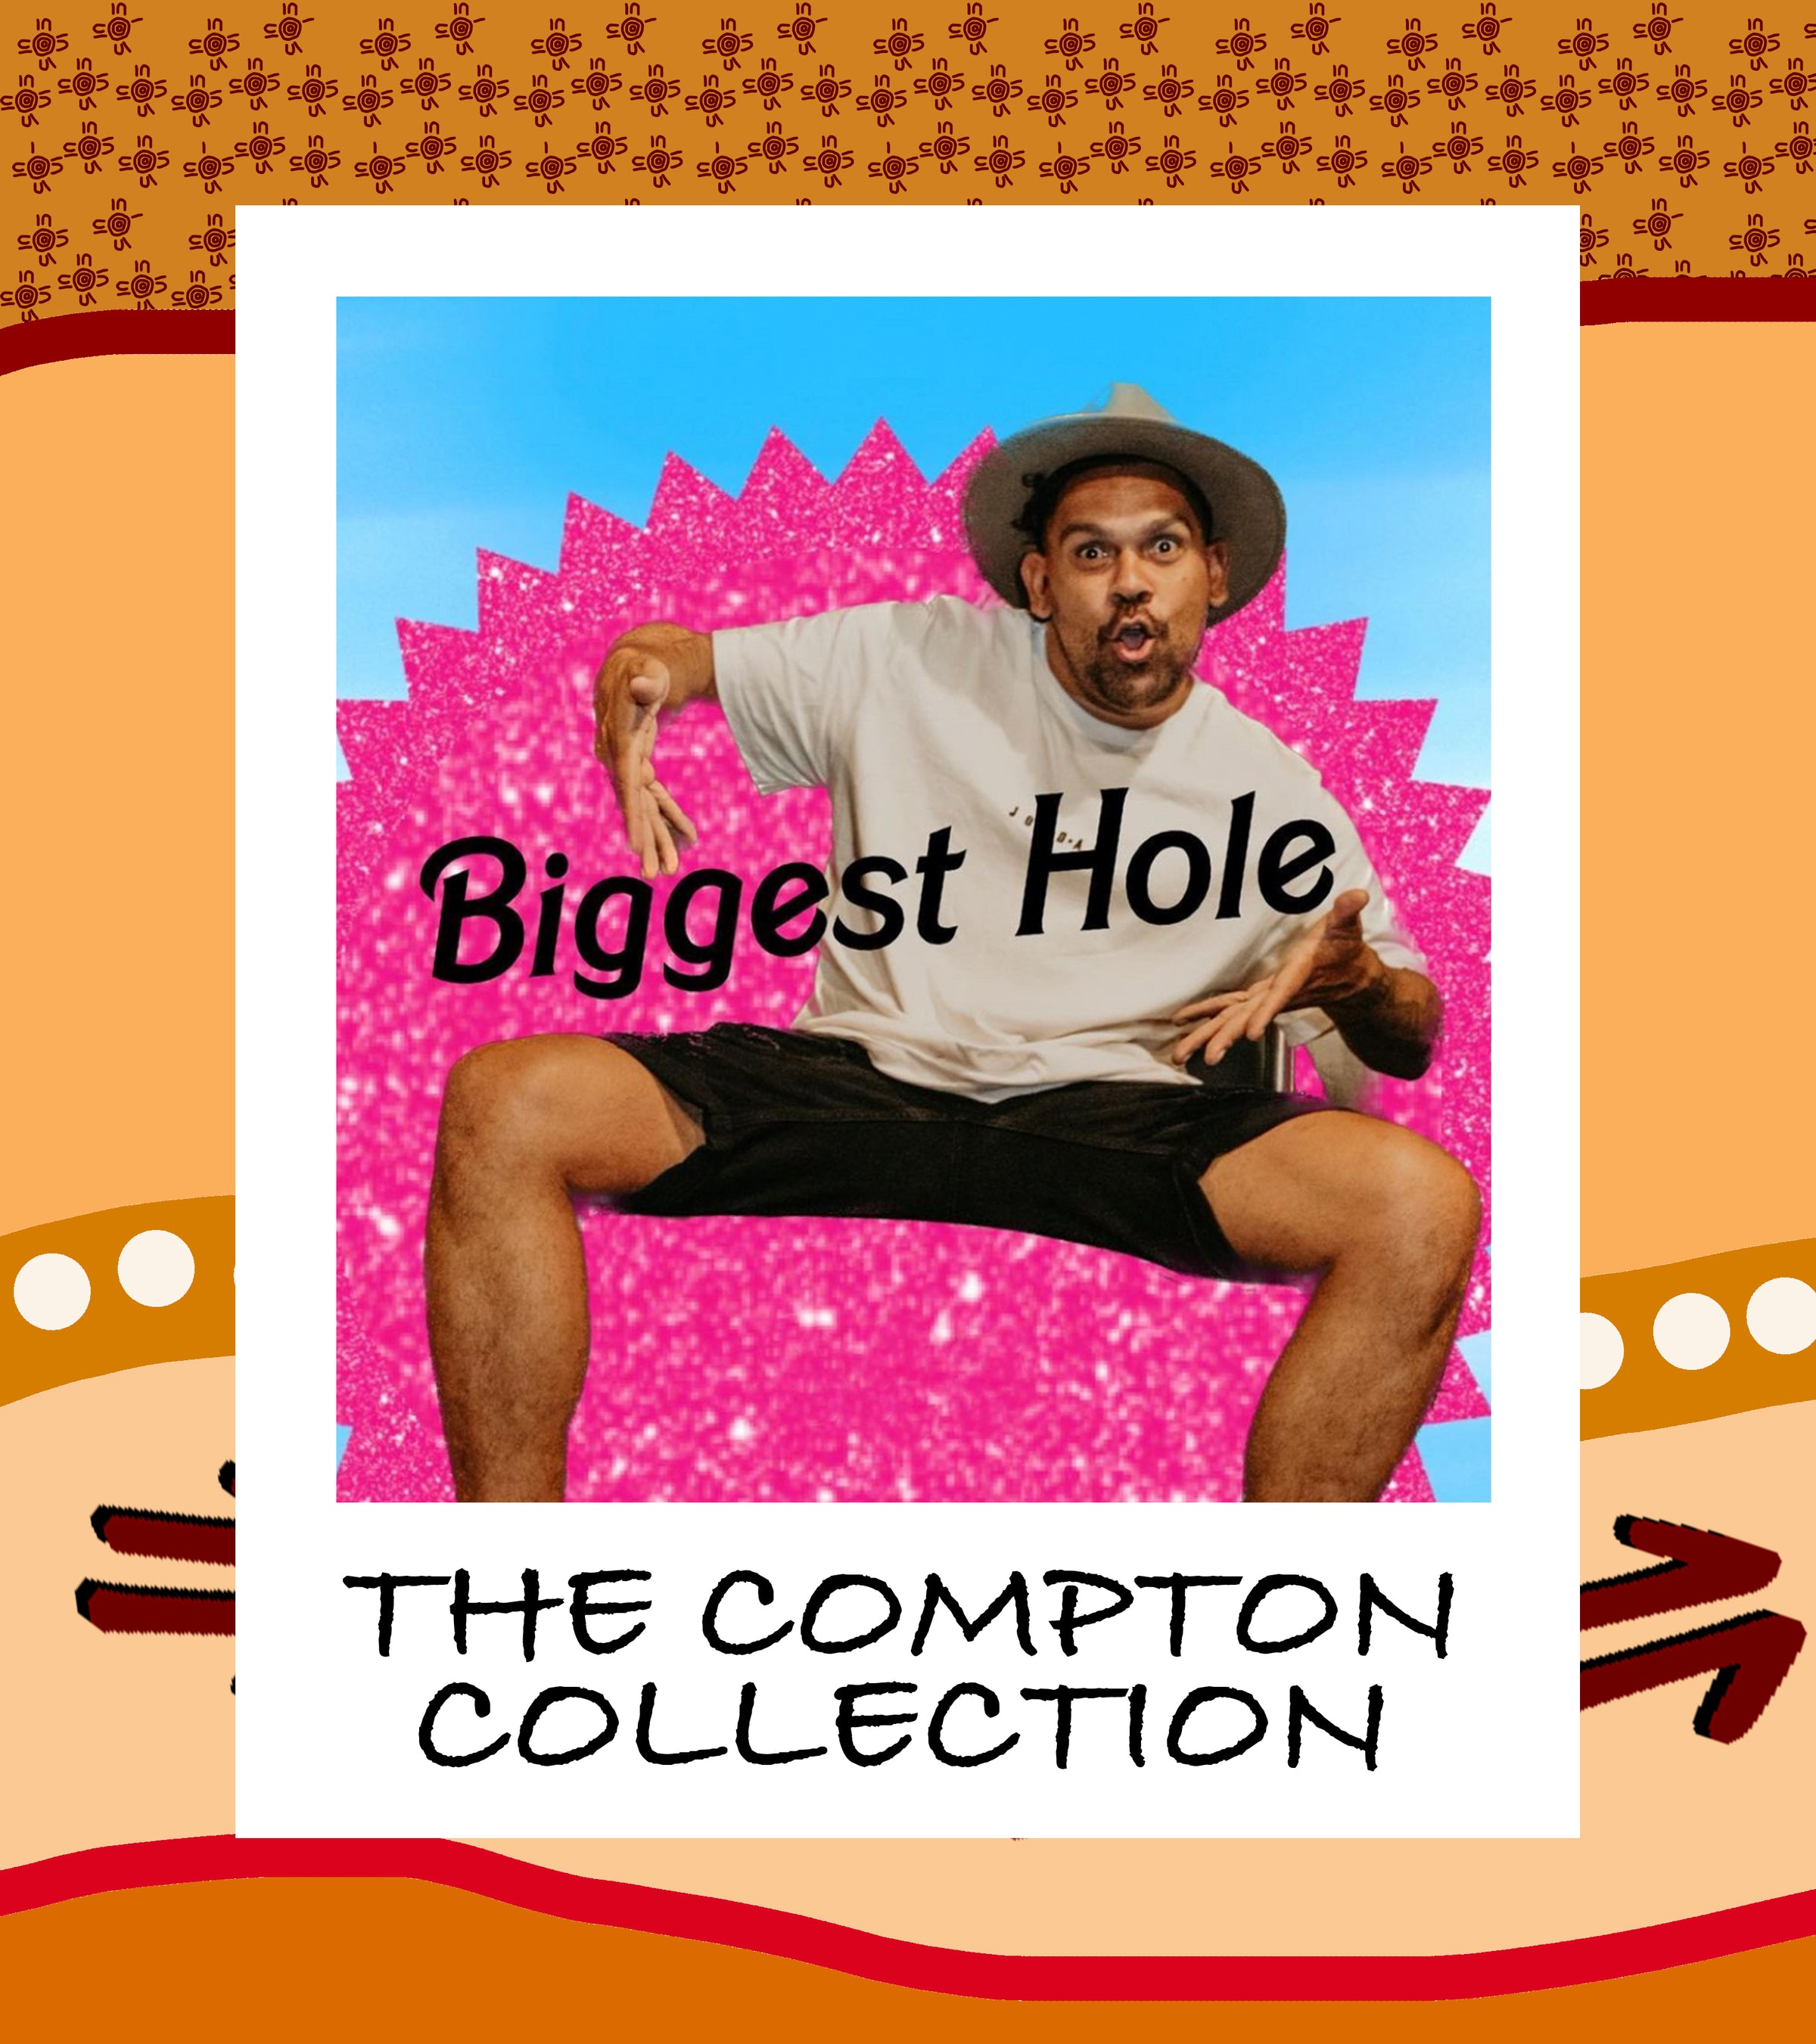 The Compton Collection